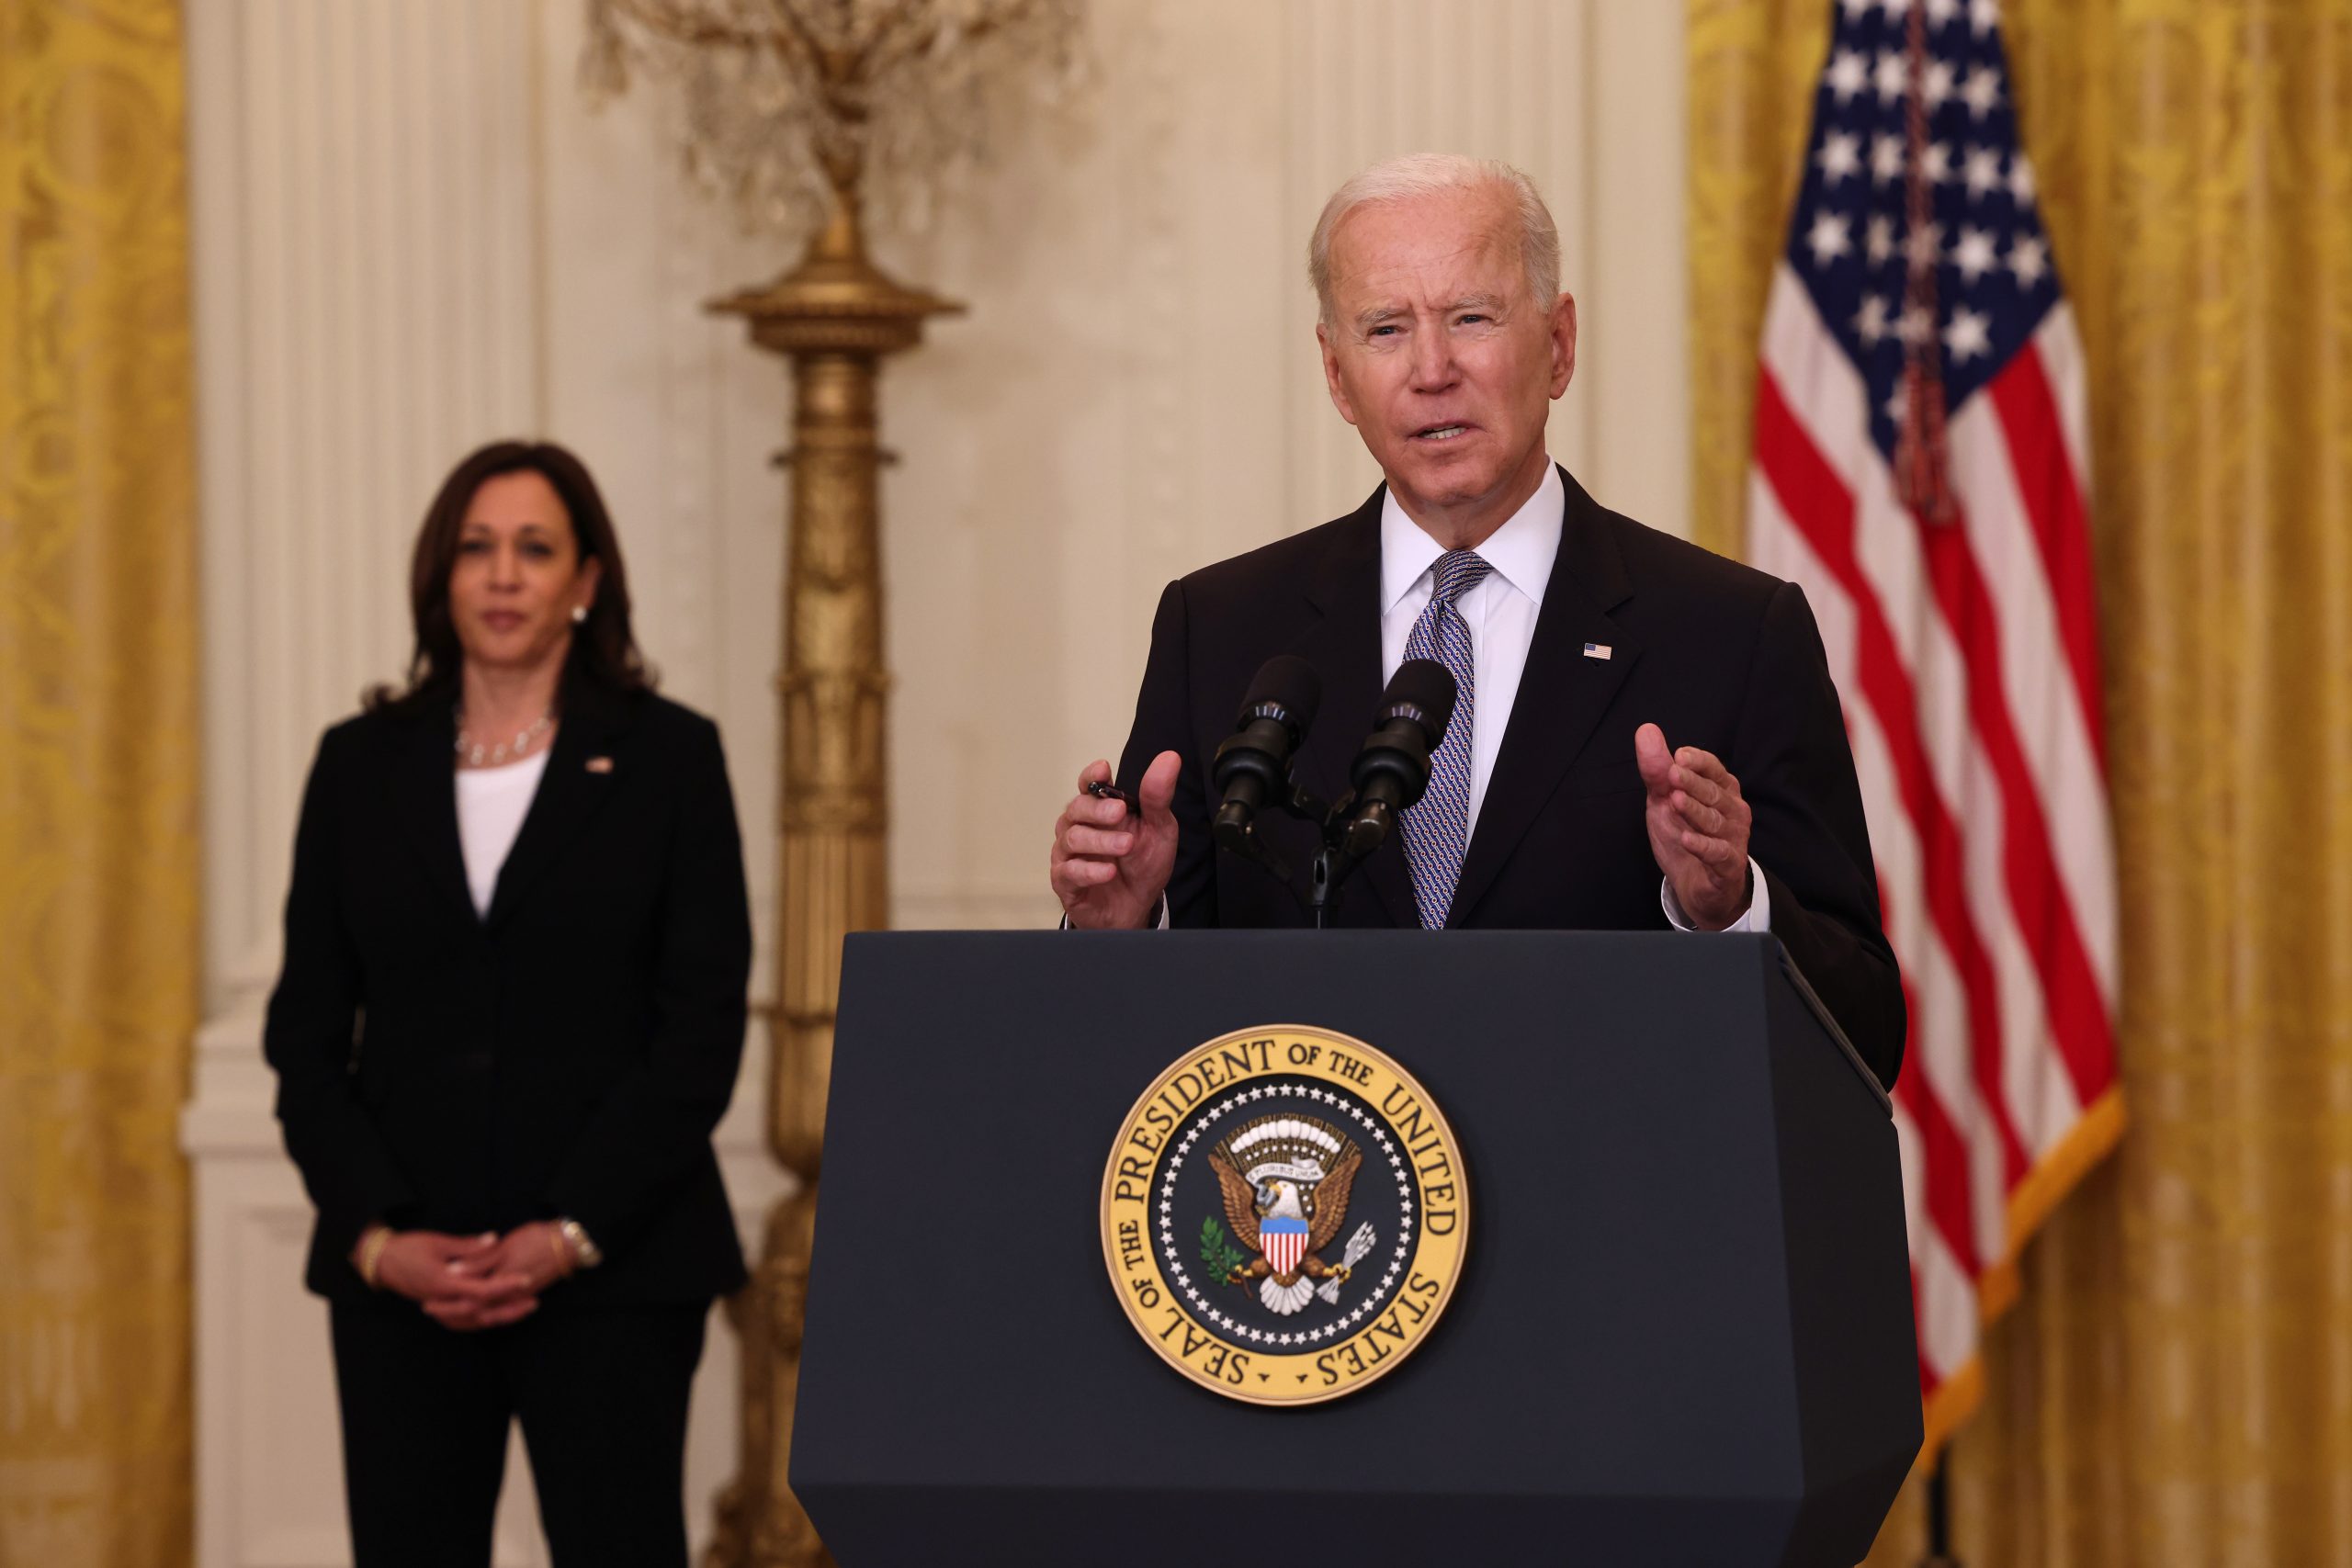 U.S. President Joe Biden, joined by Vice President Kamala Harris, gives an update on his administration’s COVID-19 response and vaccination program in the East Room of the White House on May 17, 2021 in Washington, DC.  (Photo by Anna Moneymaker/Getty Images)